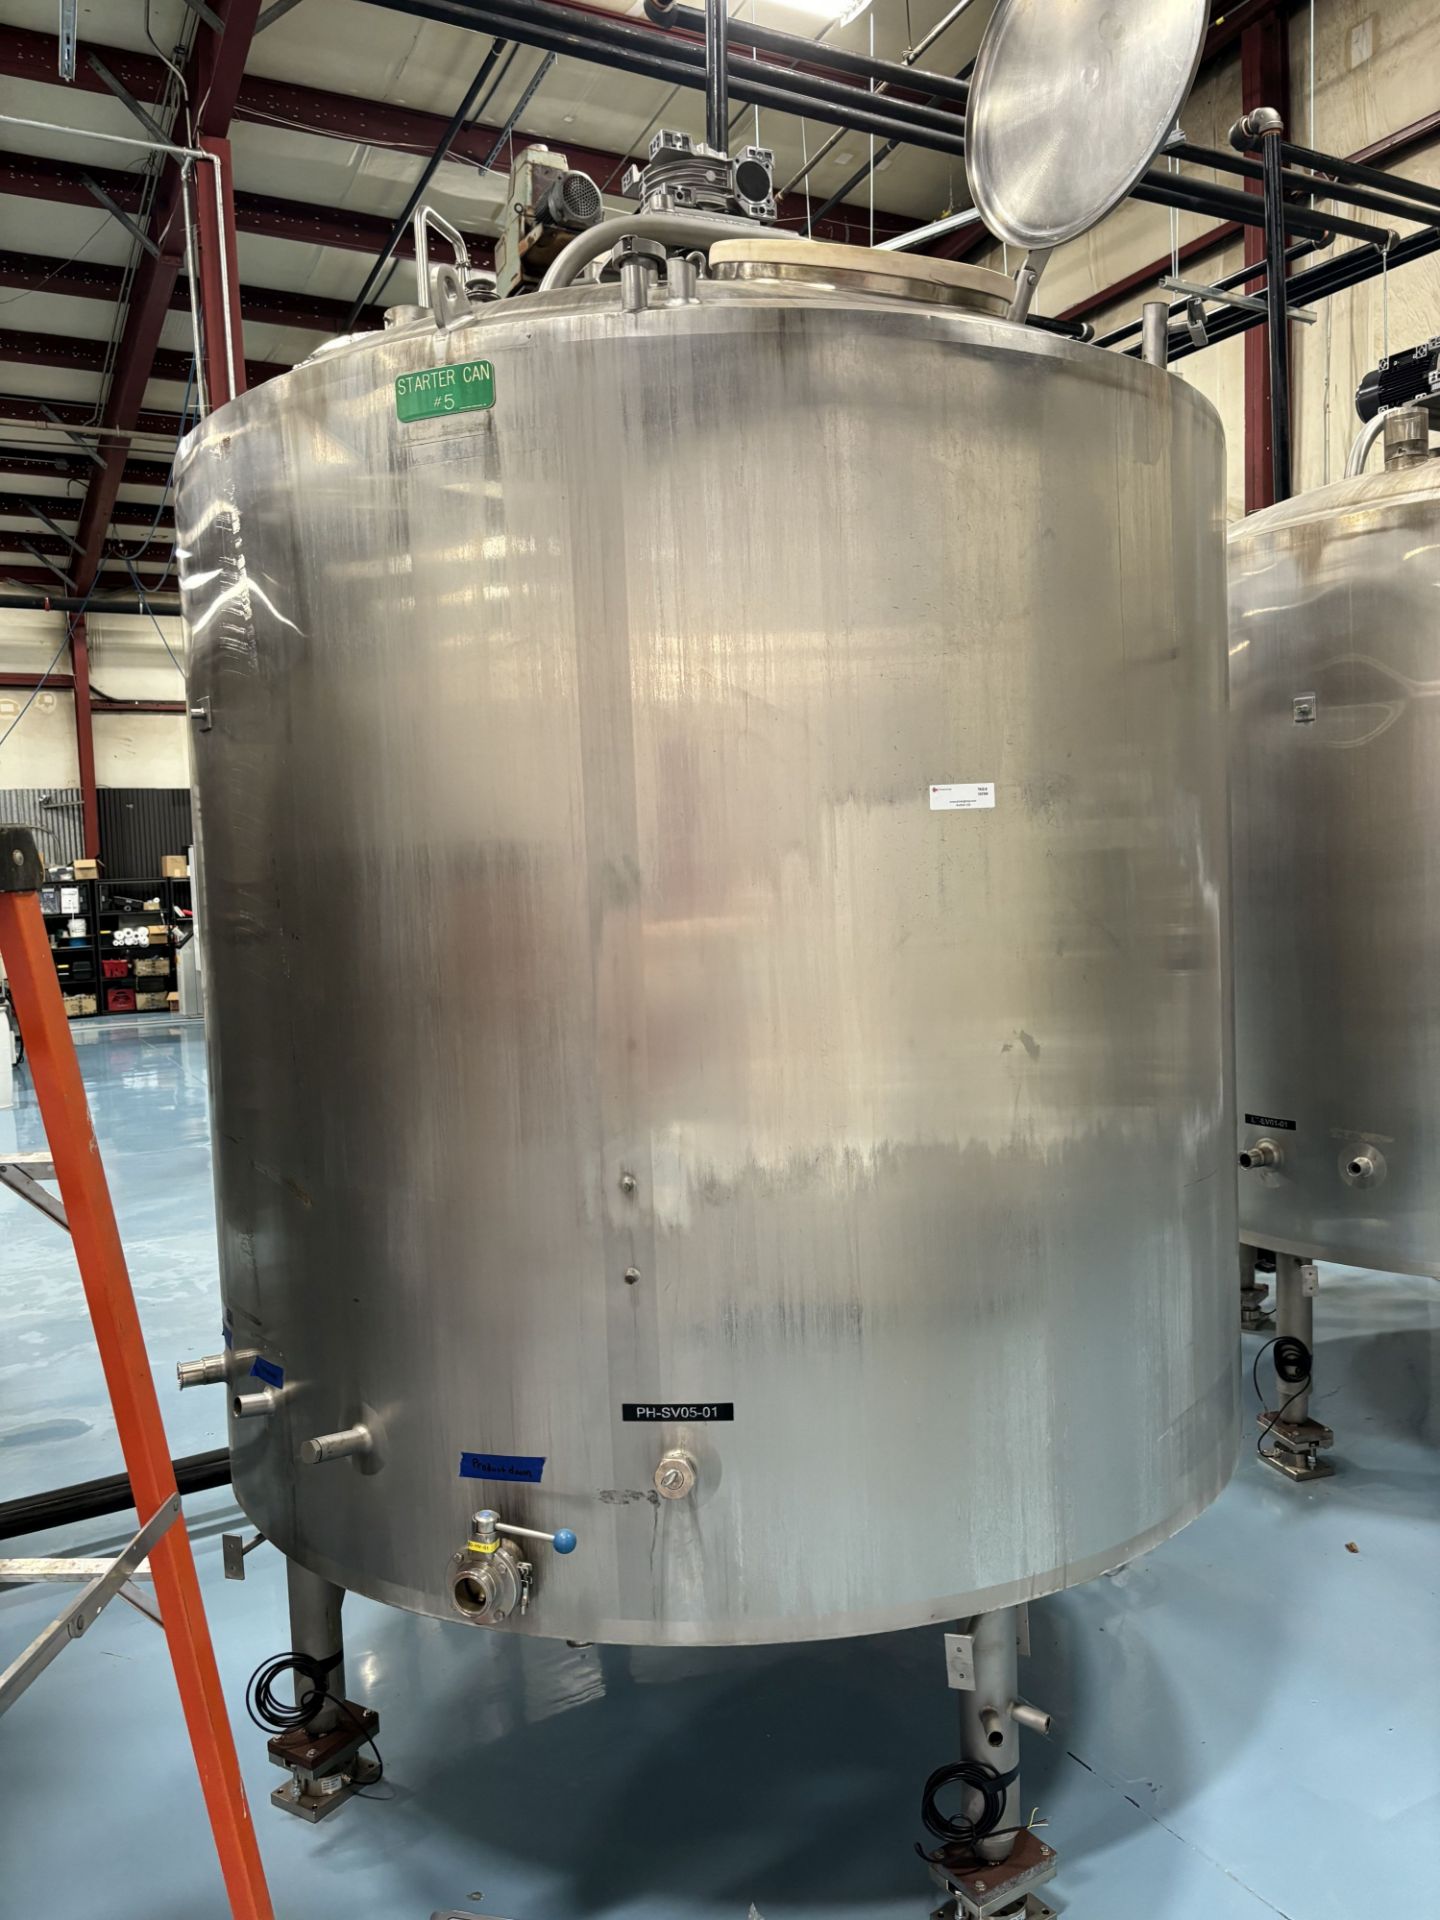 1000 GALLON STAINLESS STEEL JACKETED TANK WITH AGITATOR & BRAND NEW LOAD CELLS & NEW MOTOR & GEARBOX